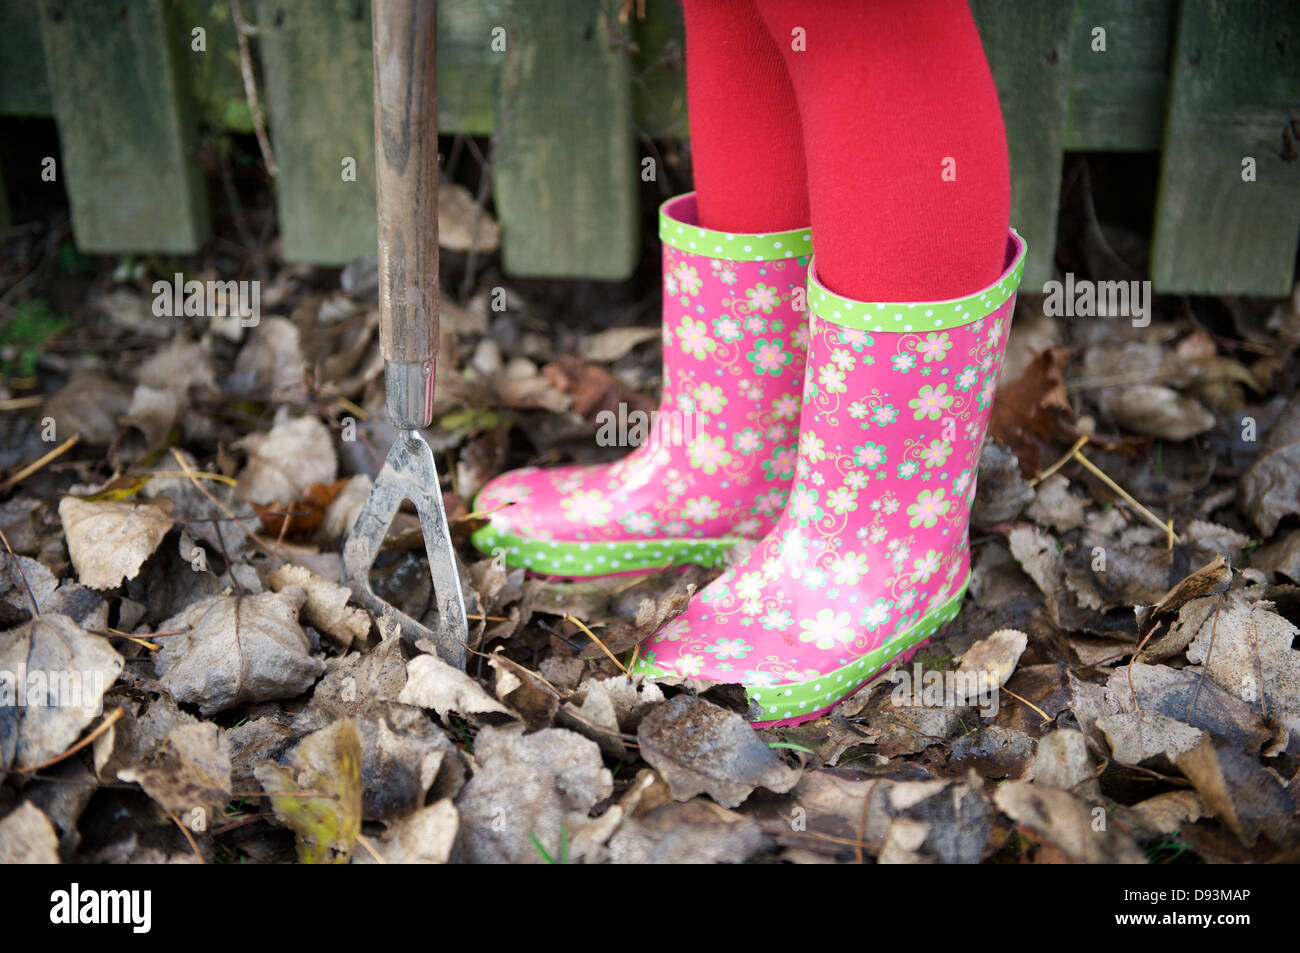 Young child in a pair of pink wellies gardening in a school garden Stock Photo